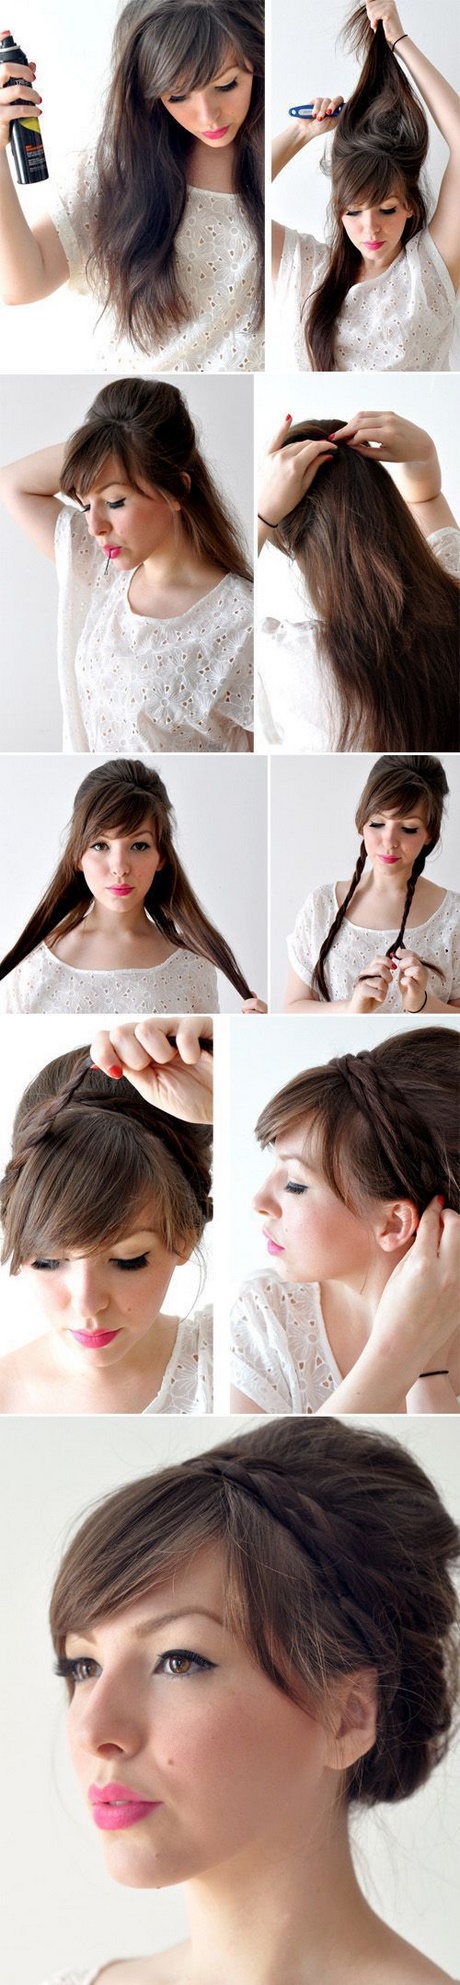 Simple hairstyles to do at home simple-hairstyles-to-do-at-home-98_5